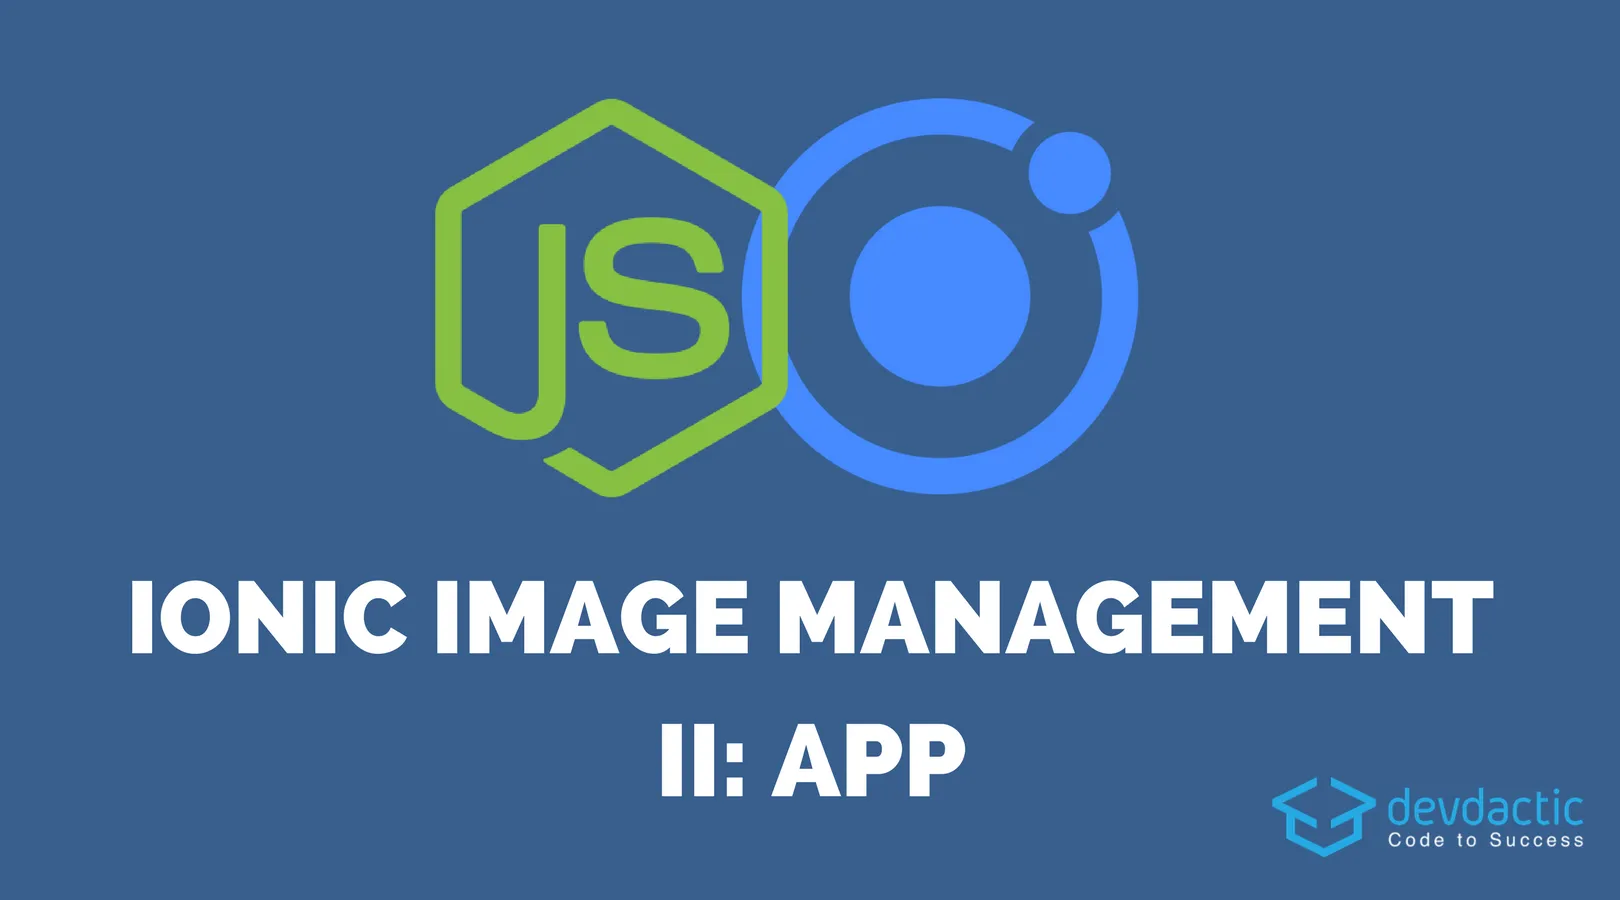 Ionic Image Upload and Management with Node.js - Part 2: Ionic App